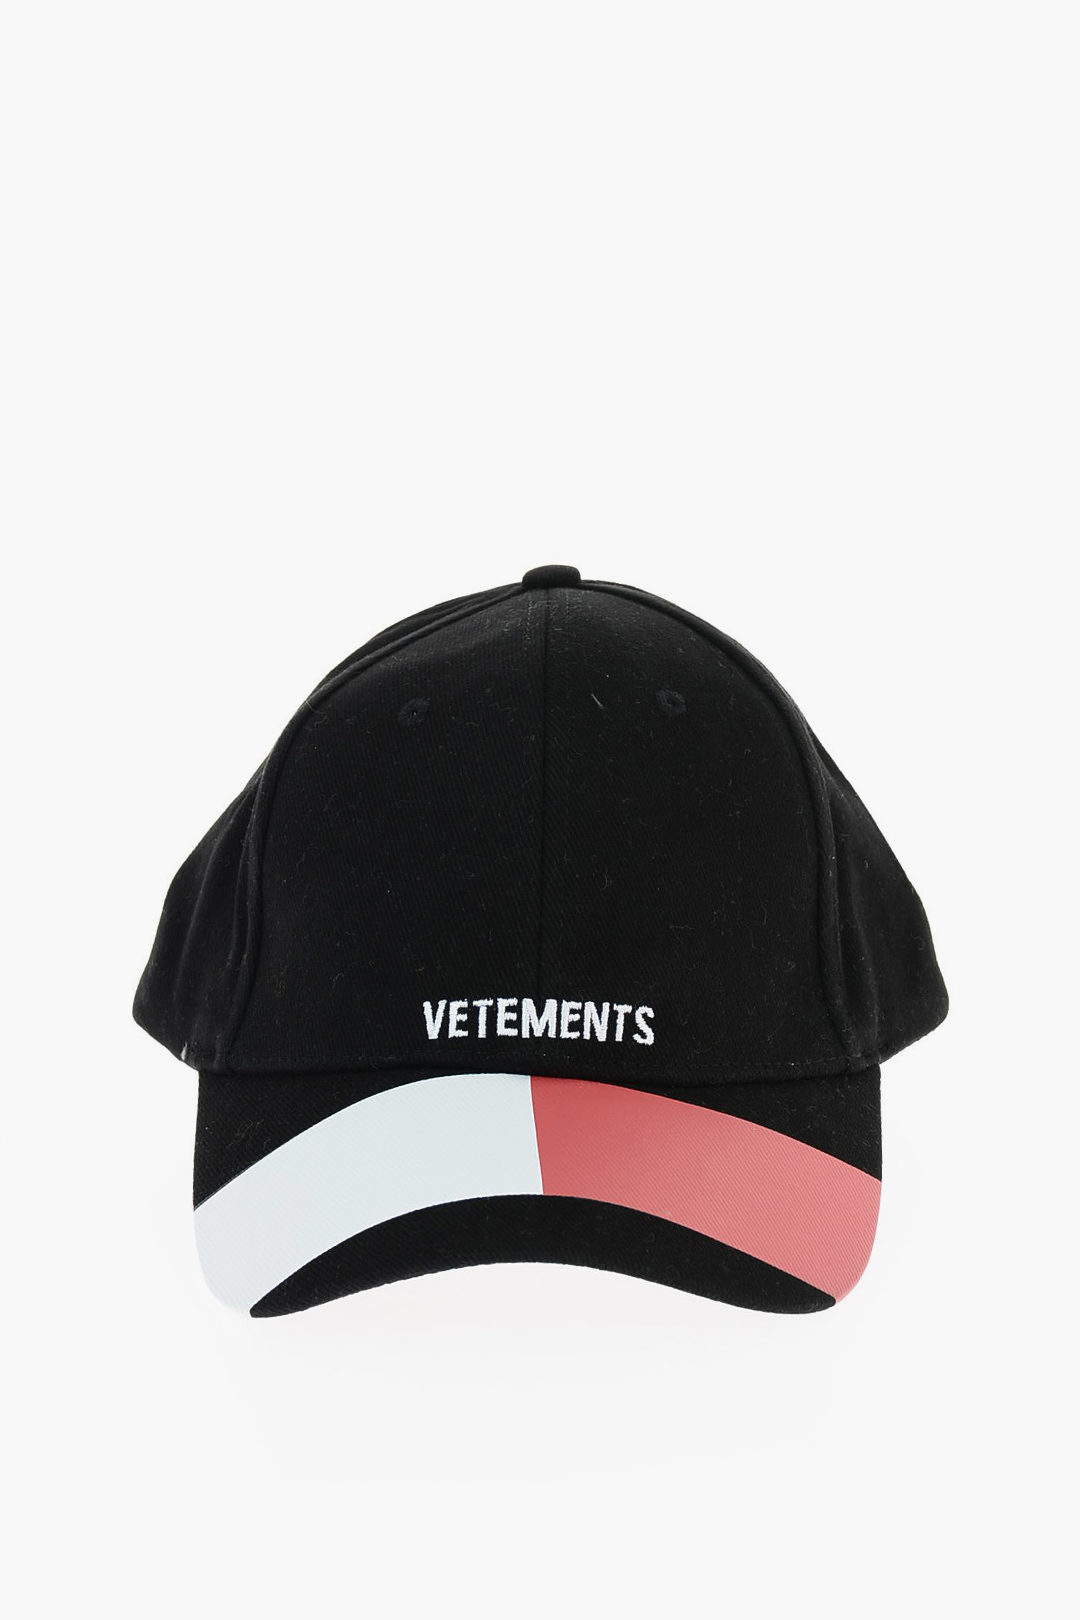 TOMMY HILFIGER embroidered cap